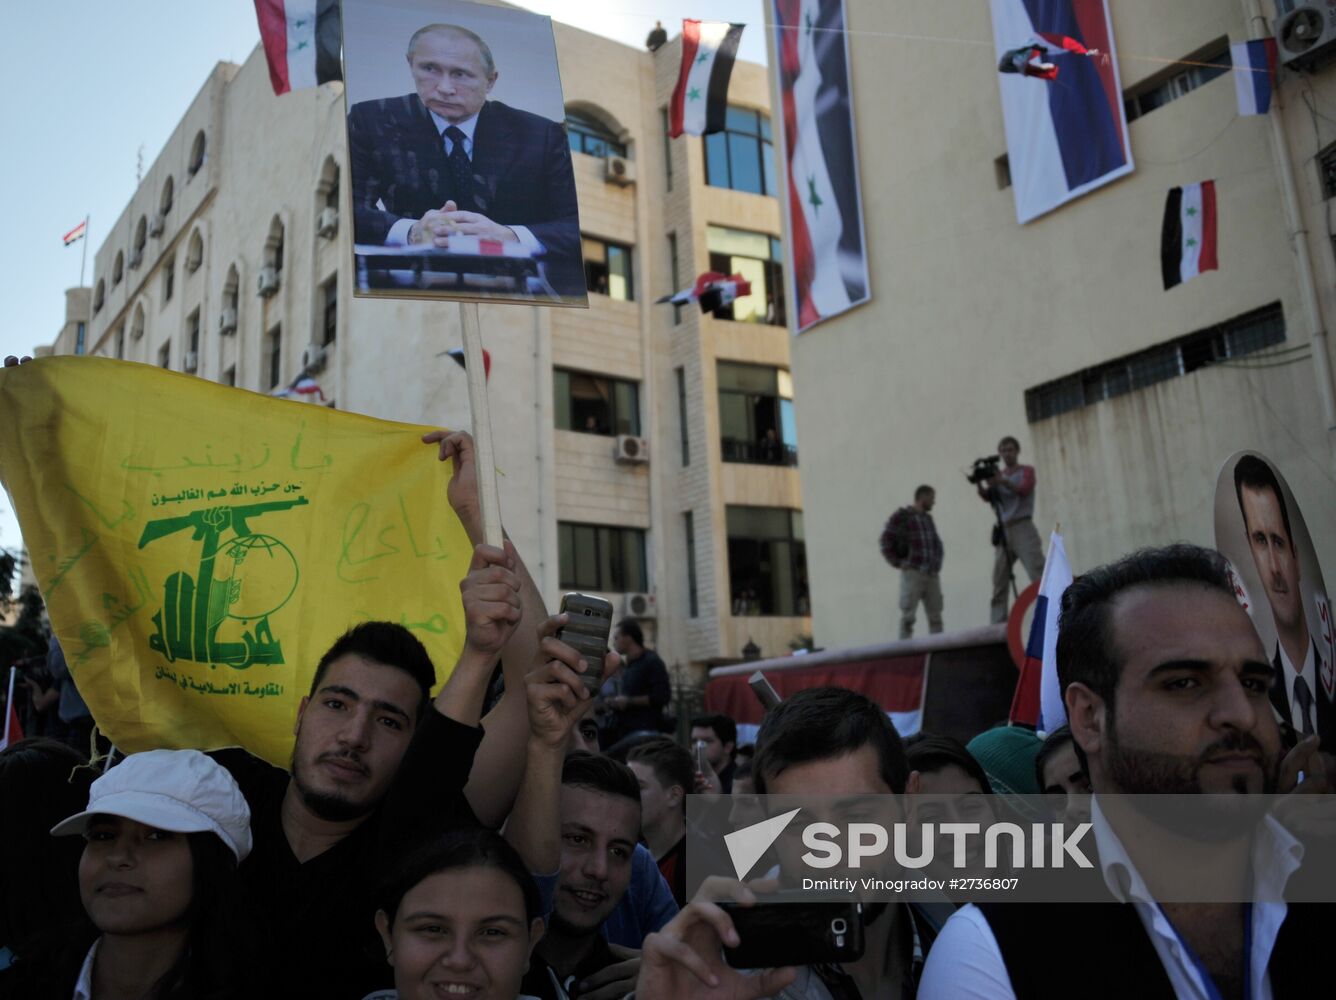 Rally in Tartus in support of Russian air force operation